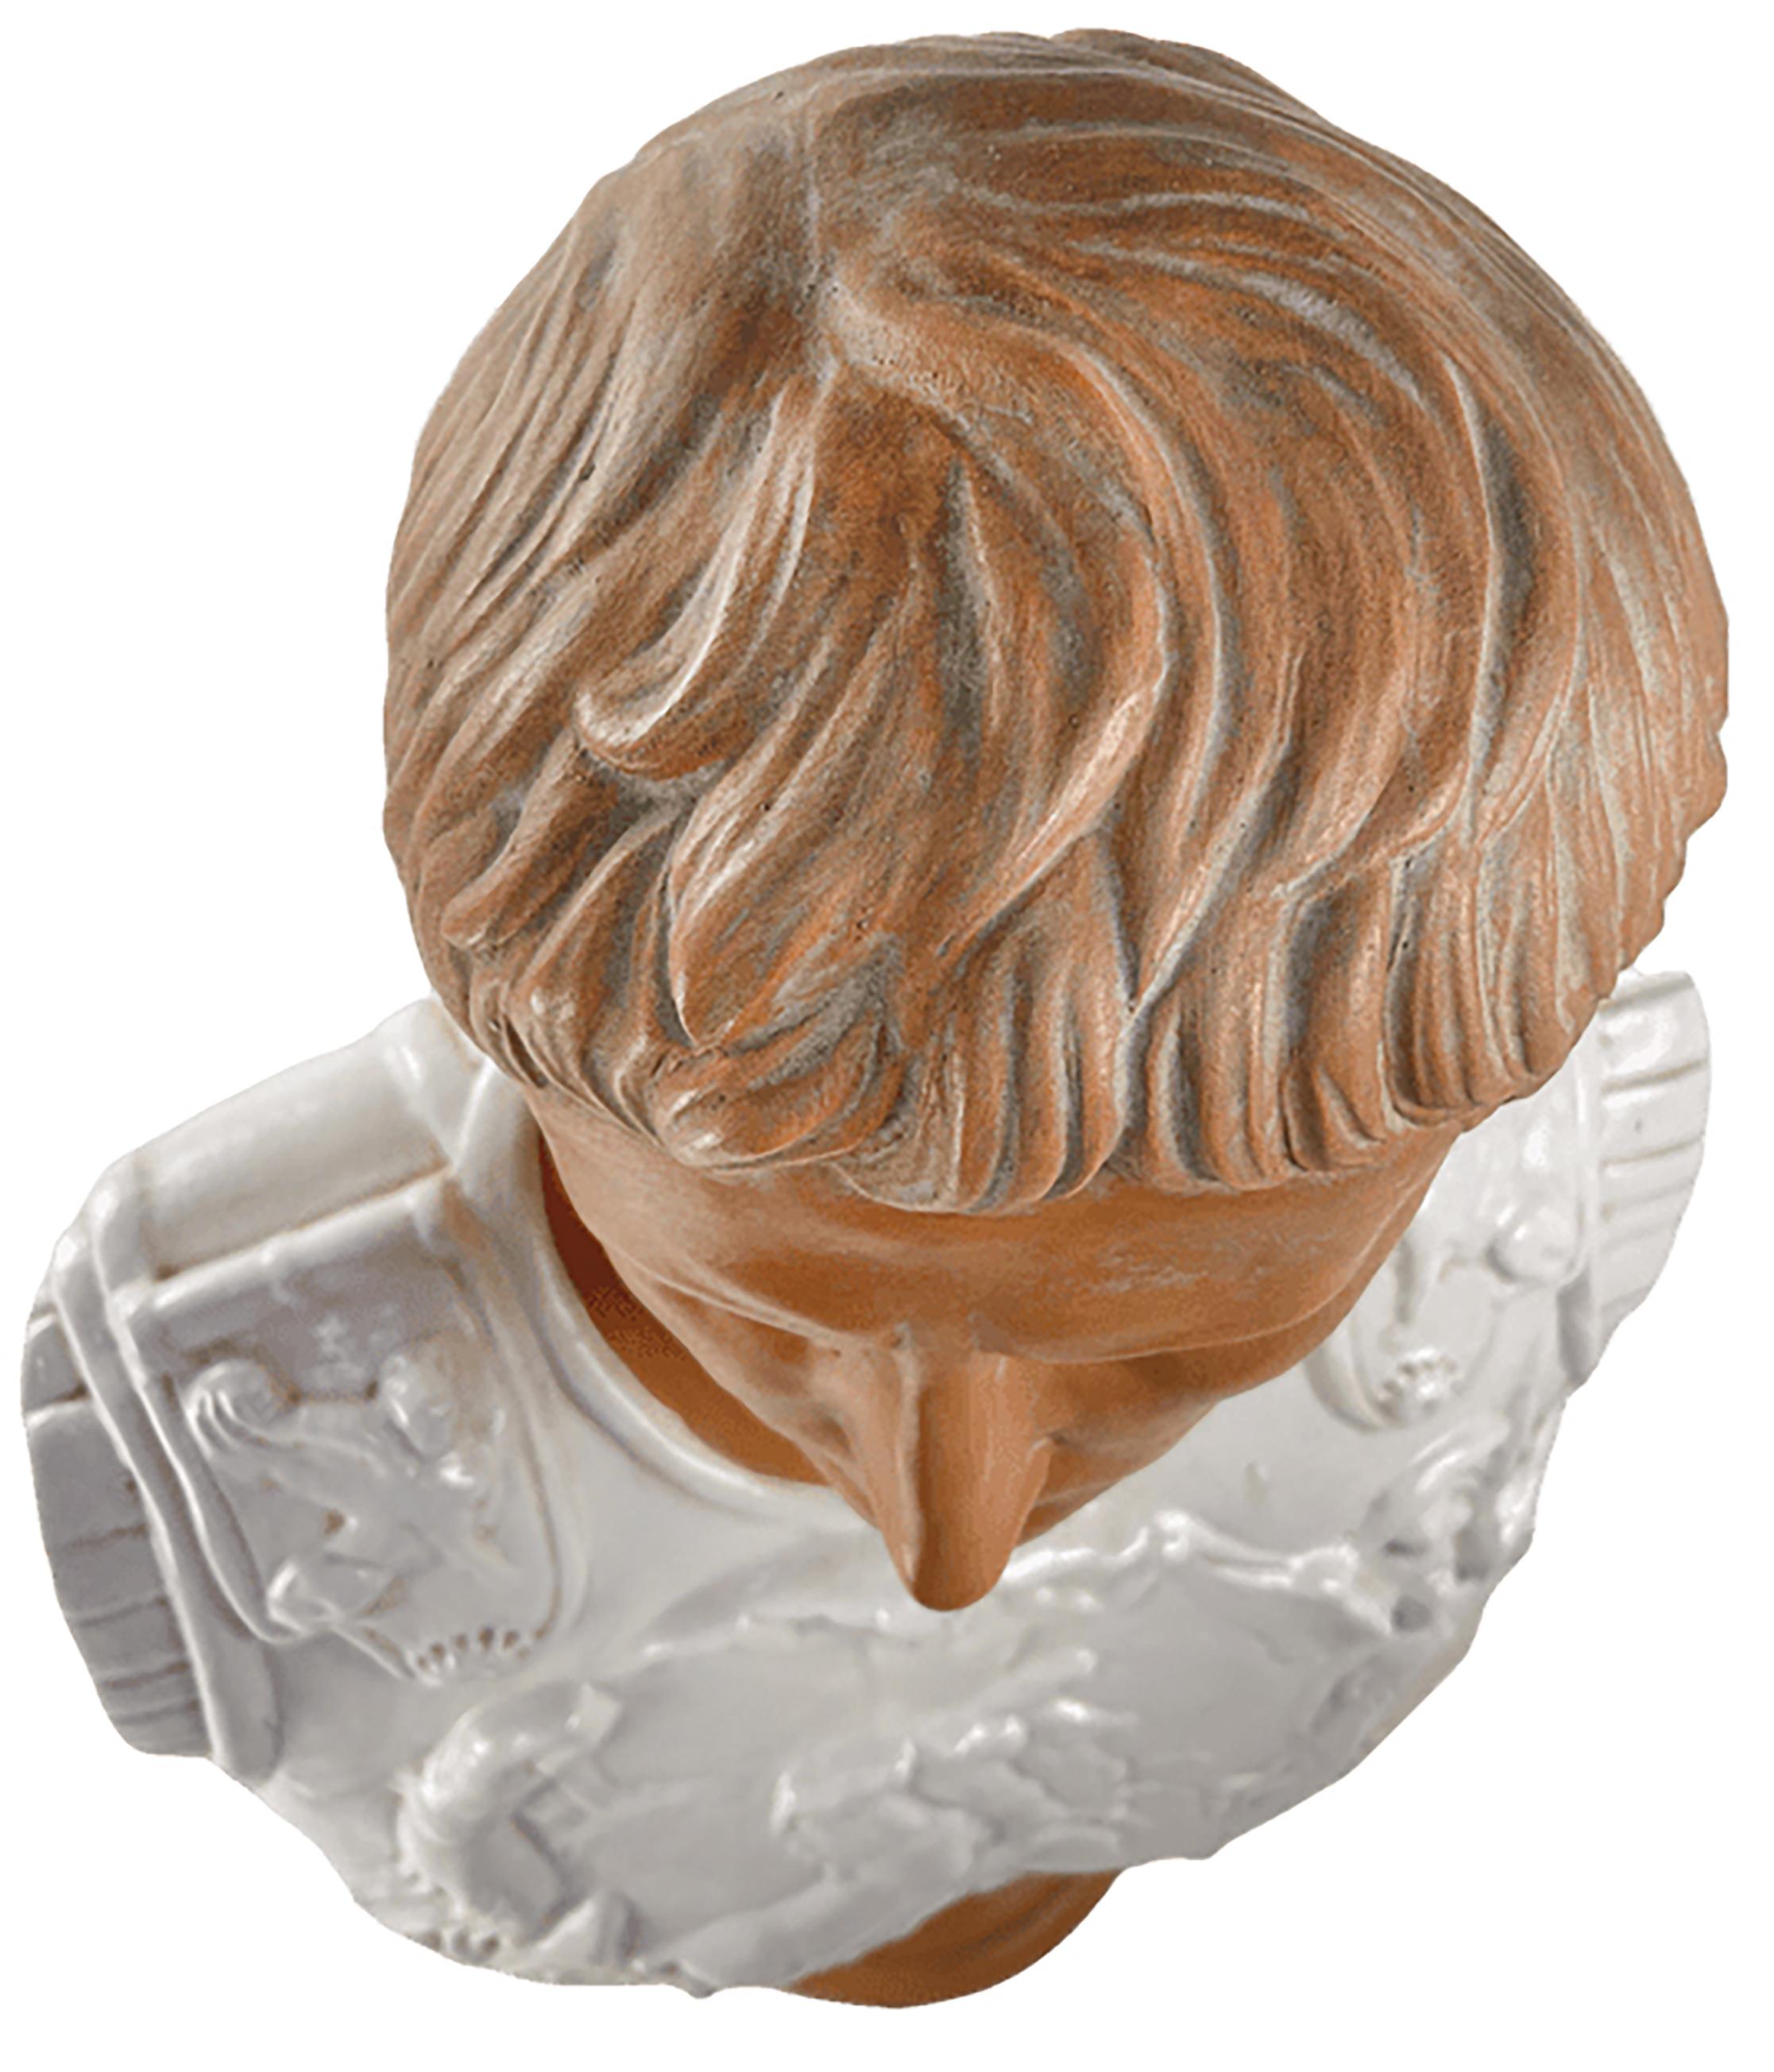 A masterfully hand carved sculptural bust of a Roman soldier. This is a modern reproduction of a roman era bust with a glazed finish.

The figure holds a slight contrapposto between the head and the chest plate area. The chest is colored white